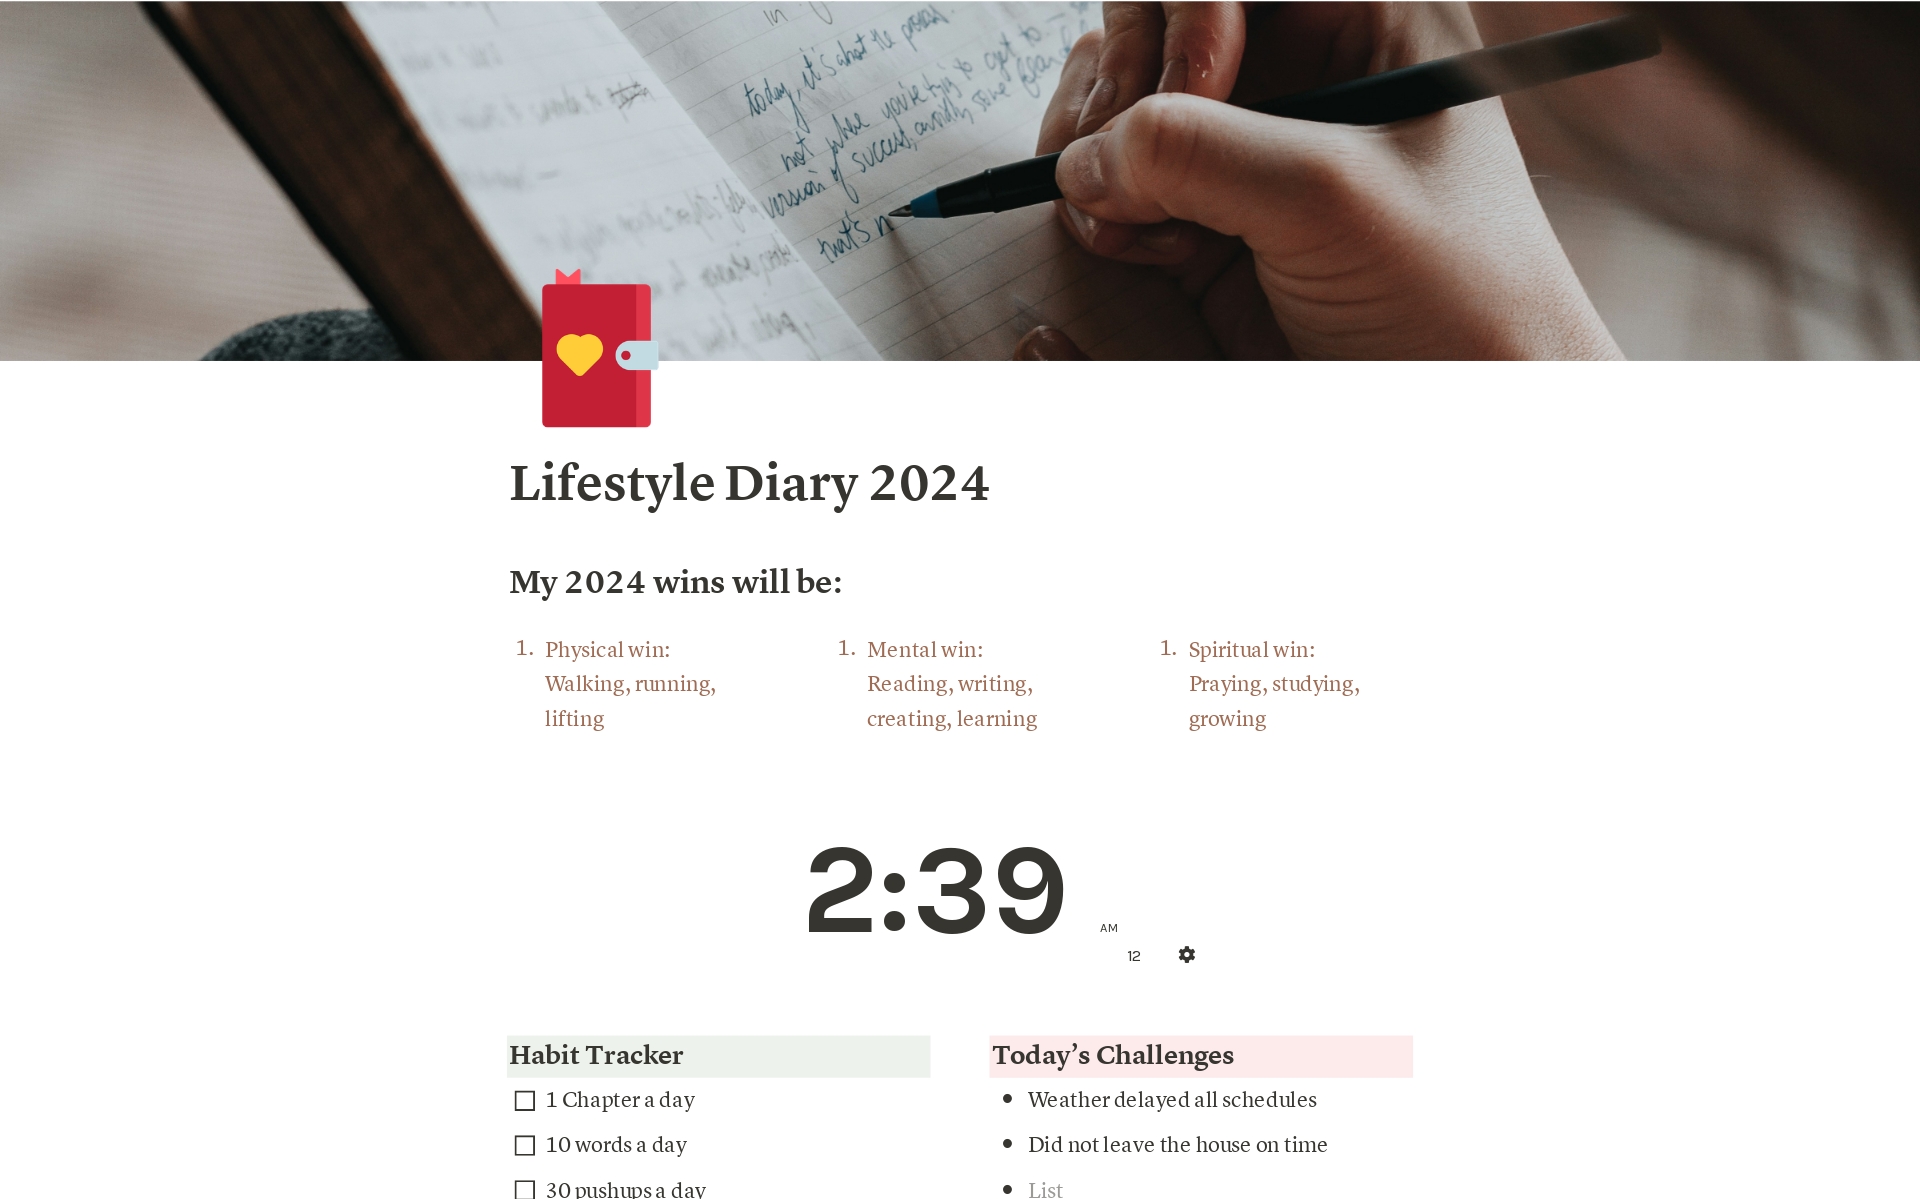 The "Lifestyle Diary 2024" template is a comprehensive organizational tool designed to help users manage their daily routines, track habits and challenges, set goals, and reflect on their mental well-being. It features a range of components including a clock for time management.